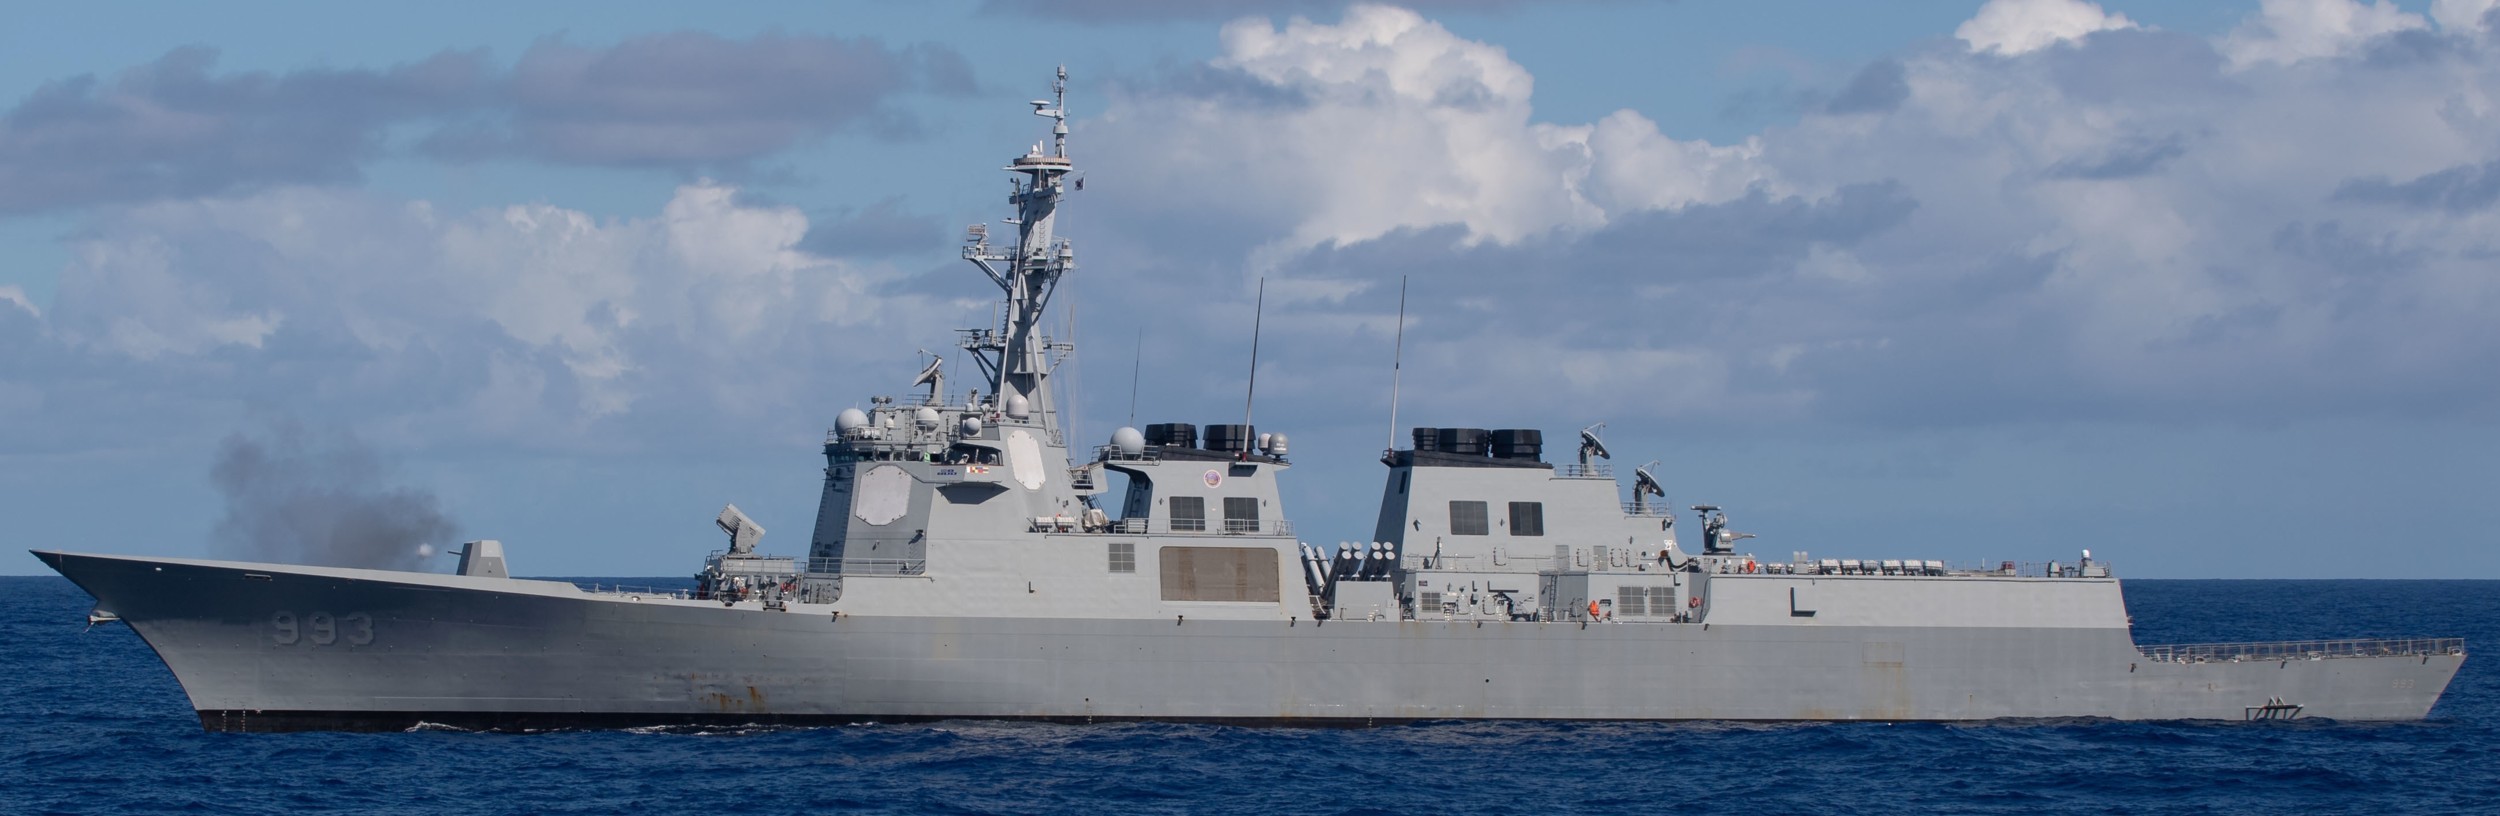 ddg-993 roks seoae ryu seong-ryong sejong the great class guided missile destroyer aegis republic of korea navy rokn 03